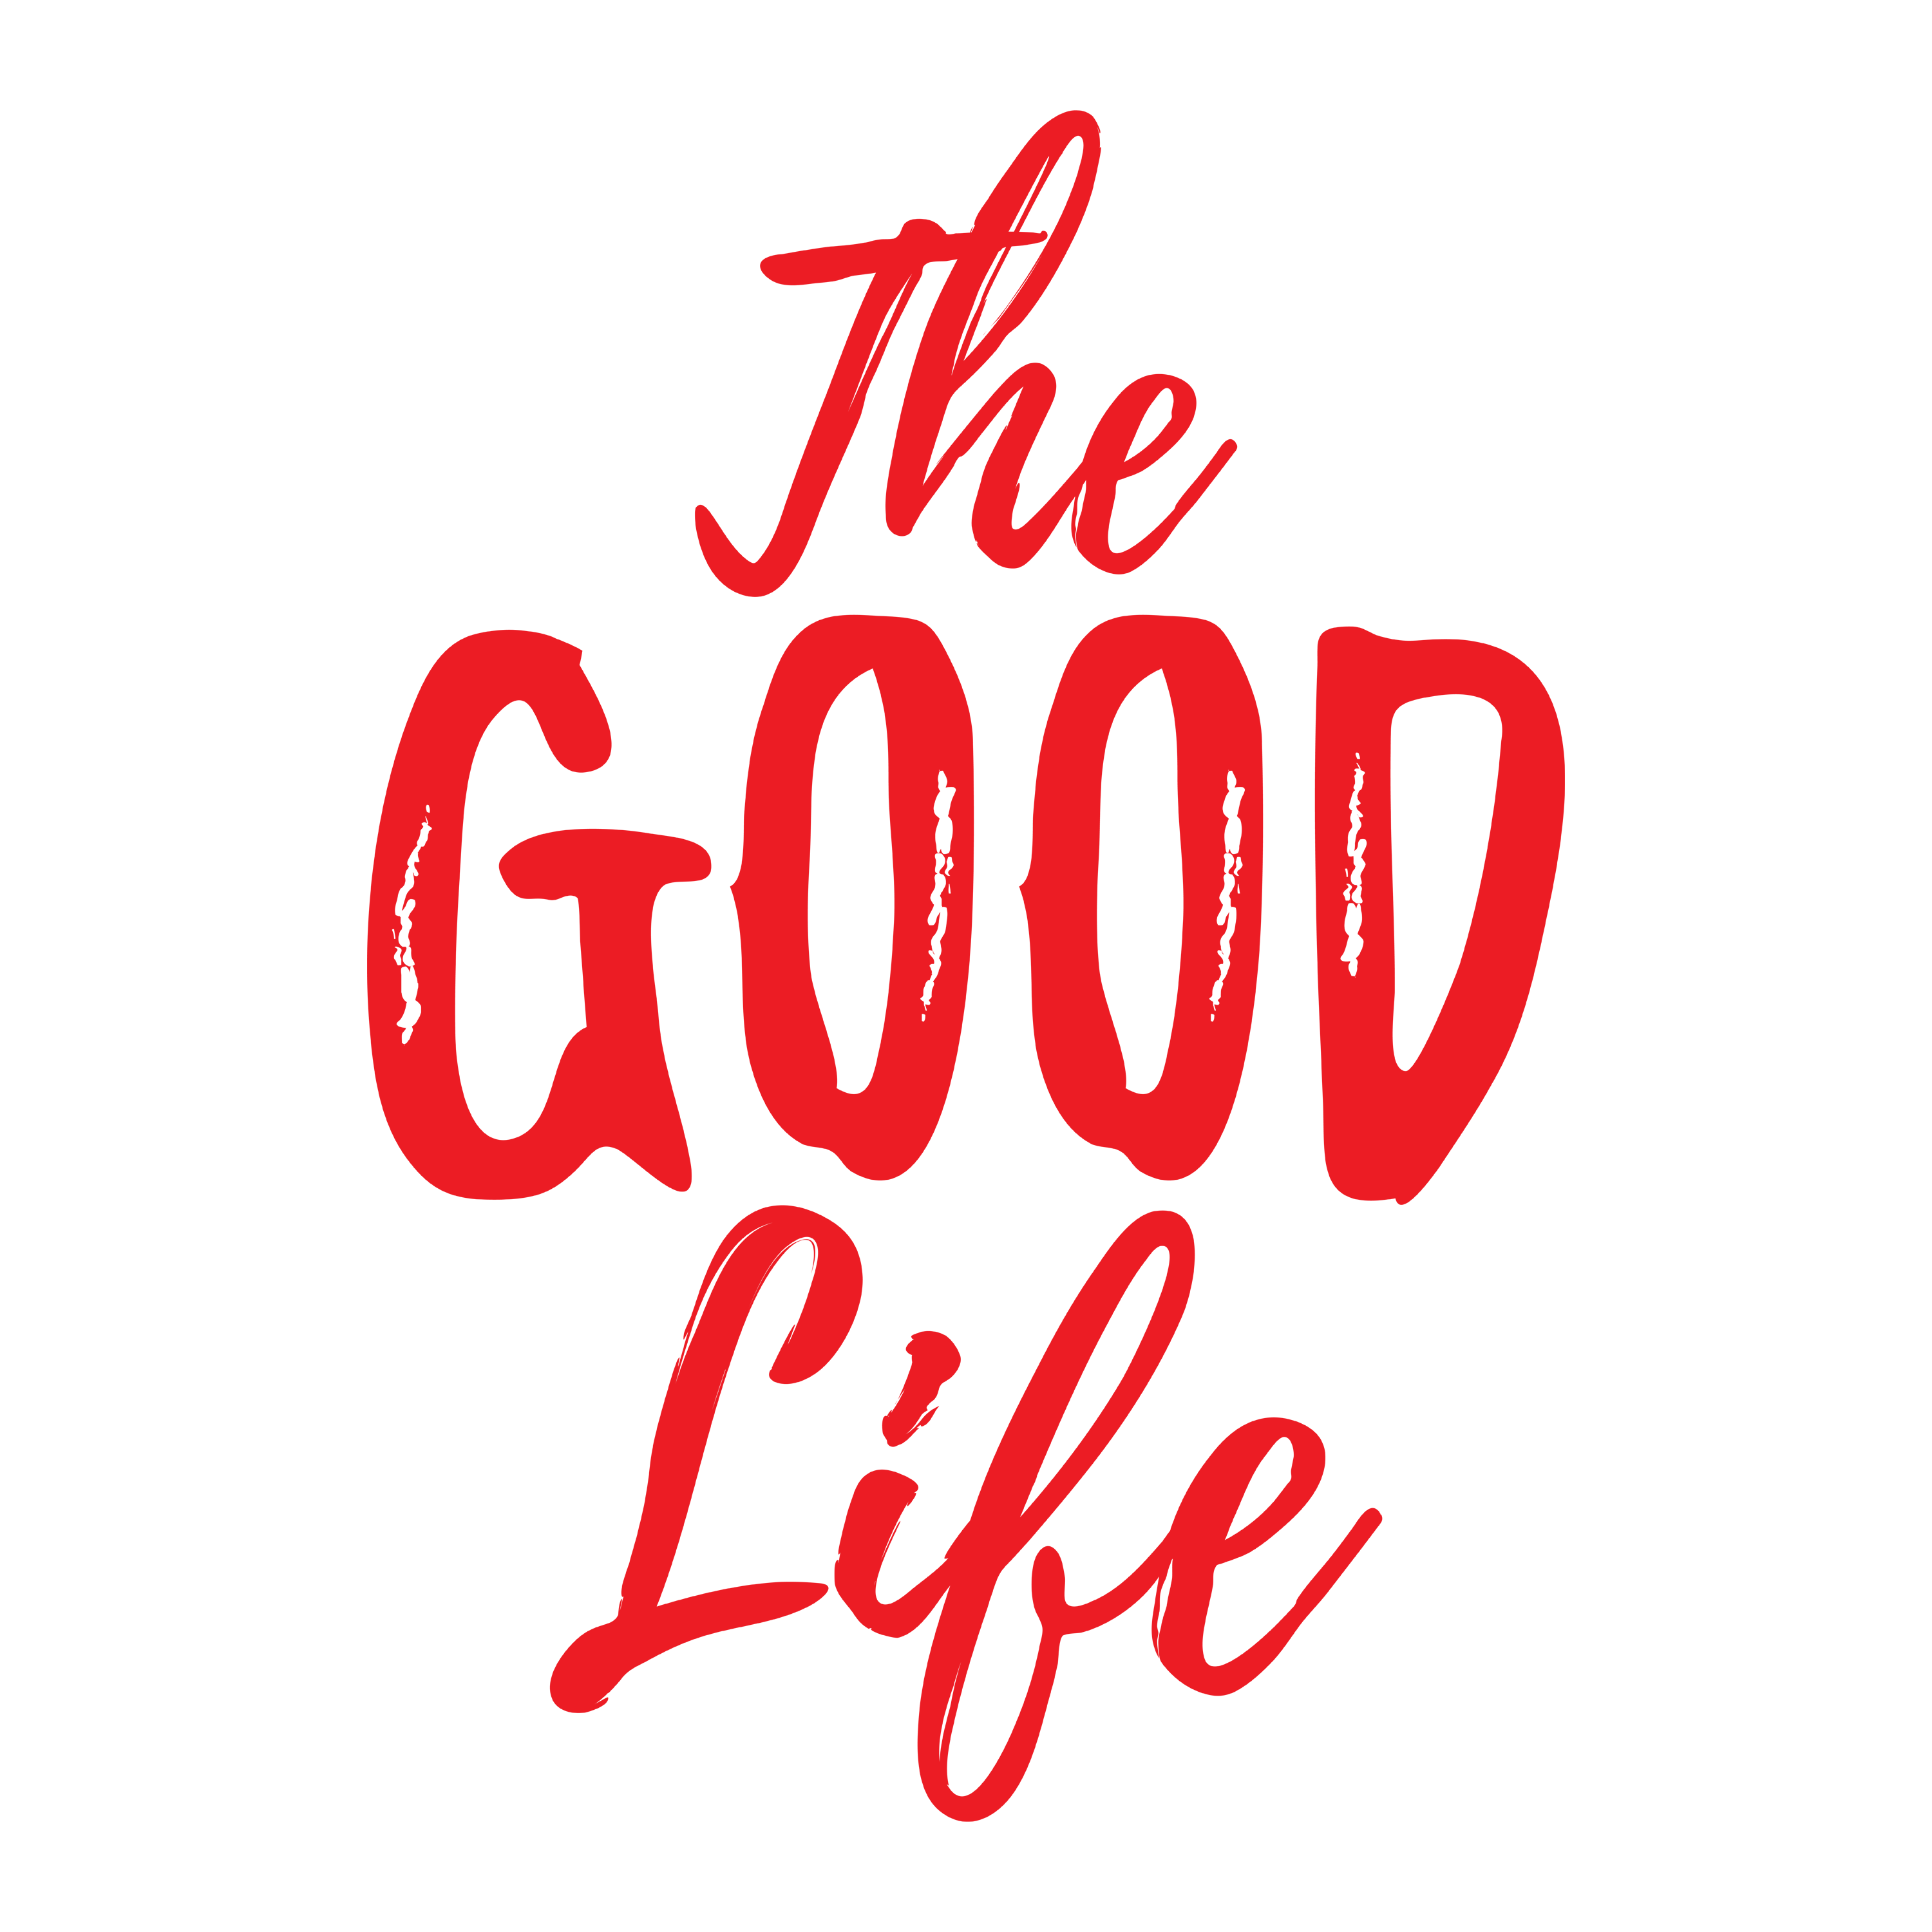 The Good Life: Andrew Leigh in Conversation